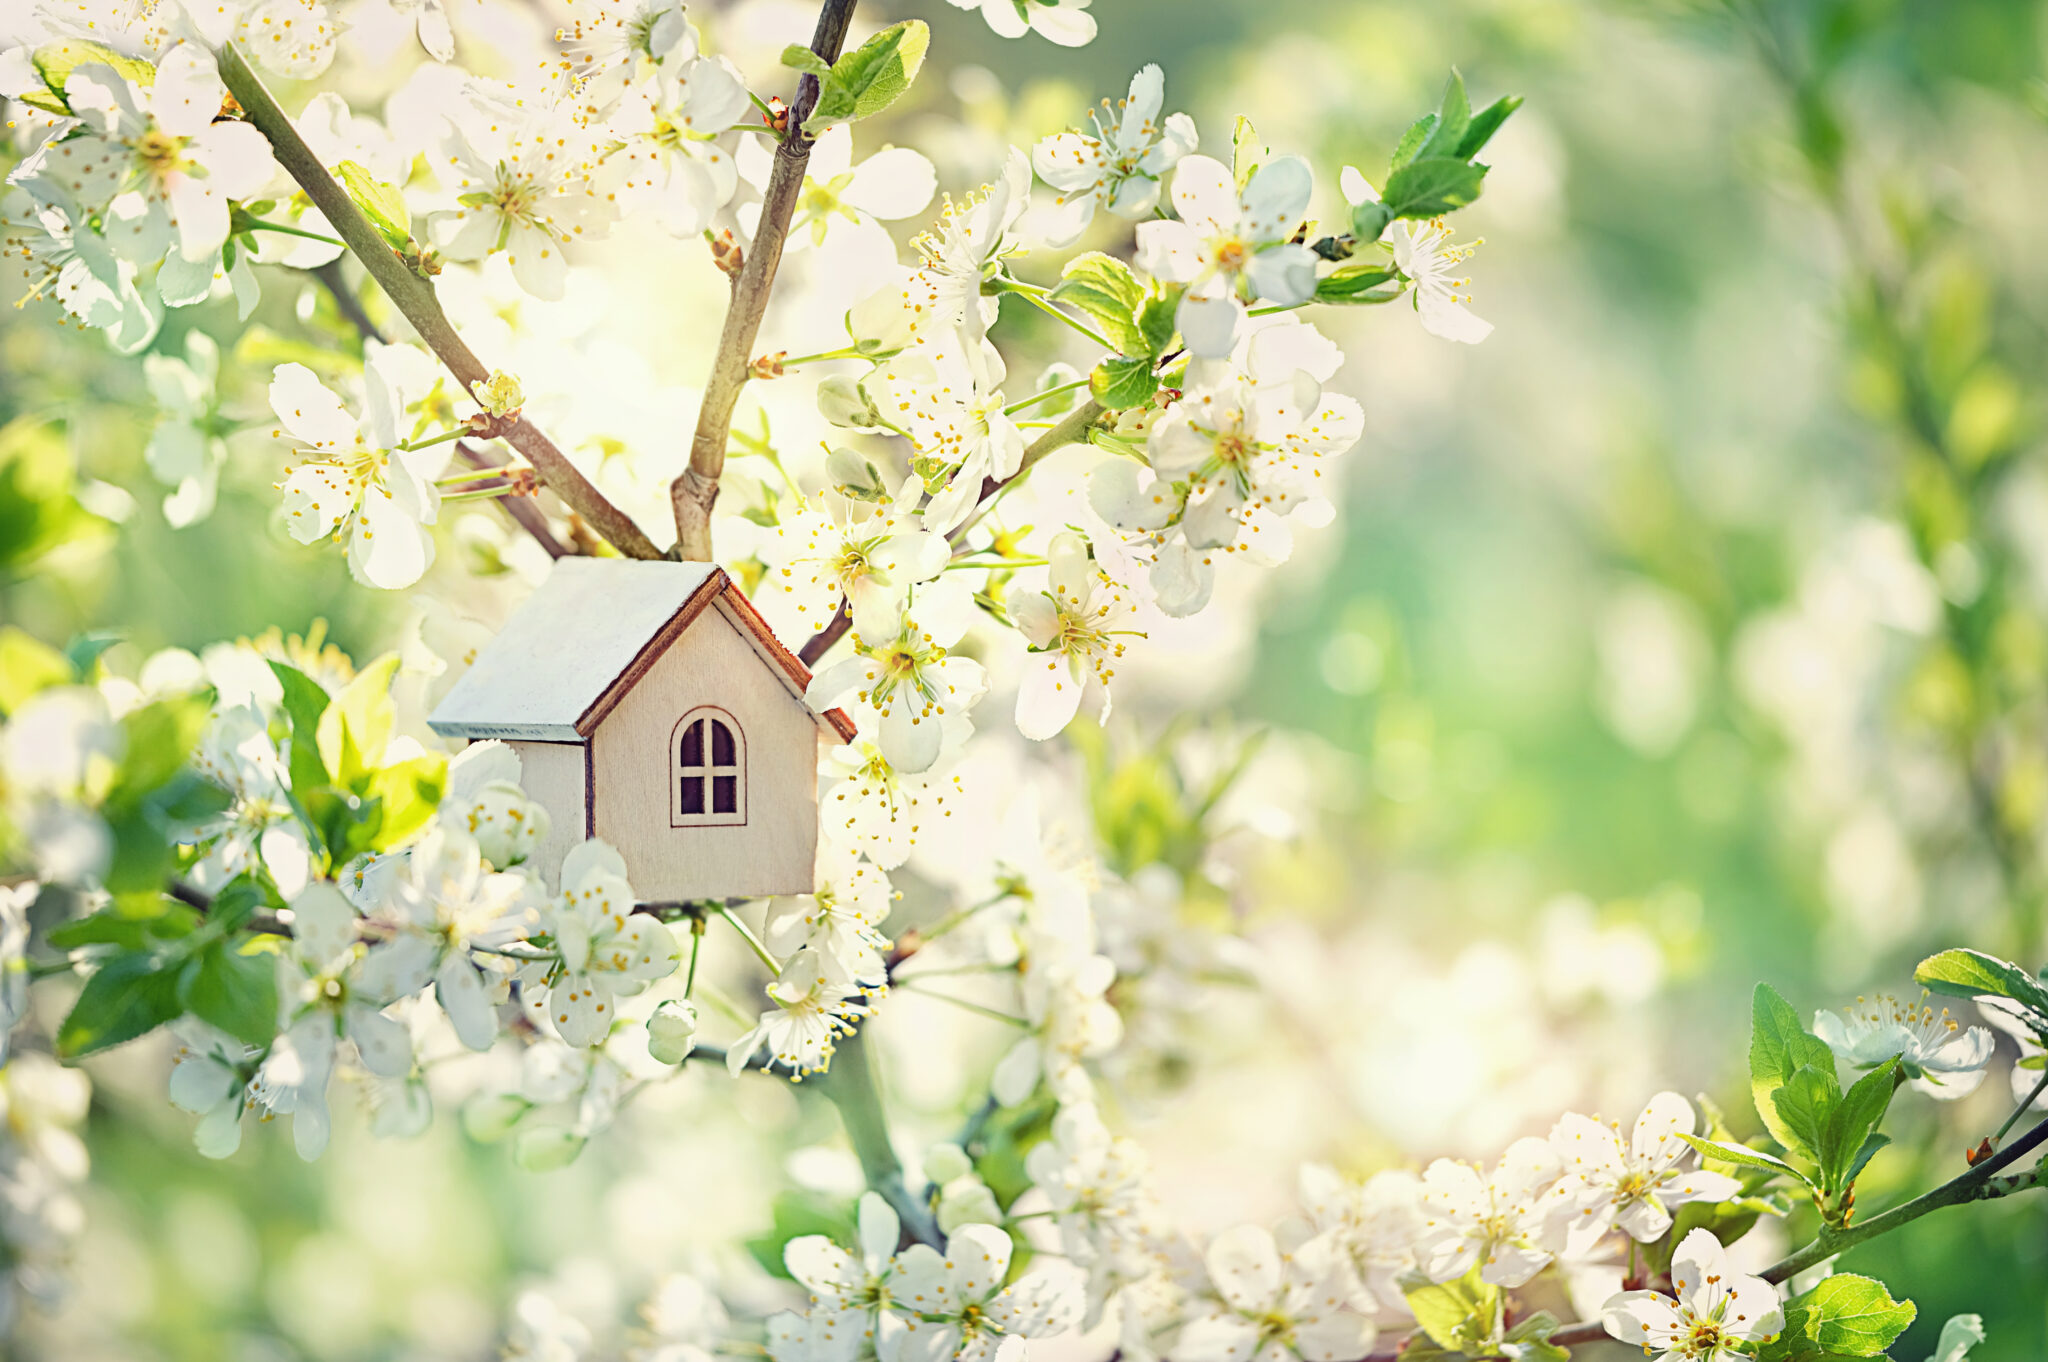 Toy,House,And,Cherry,Flowers.,Spring,Natural,Background.,Concept,Of